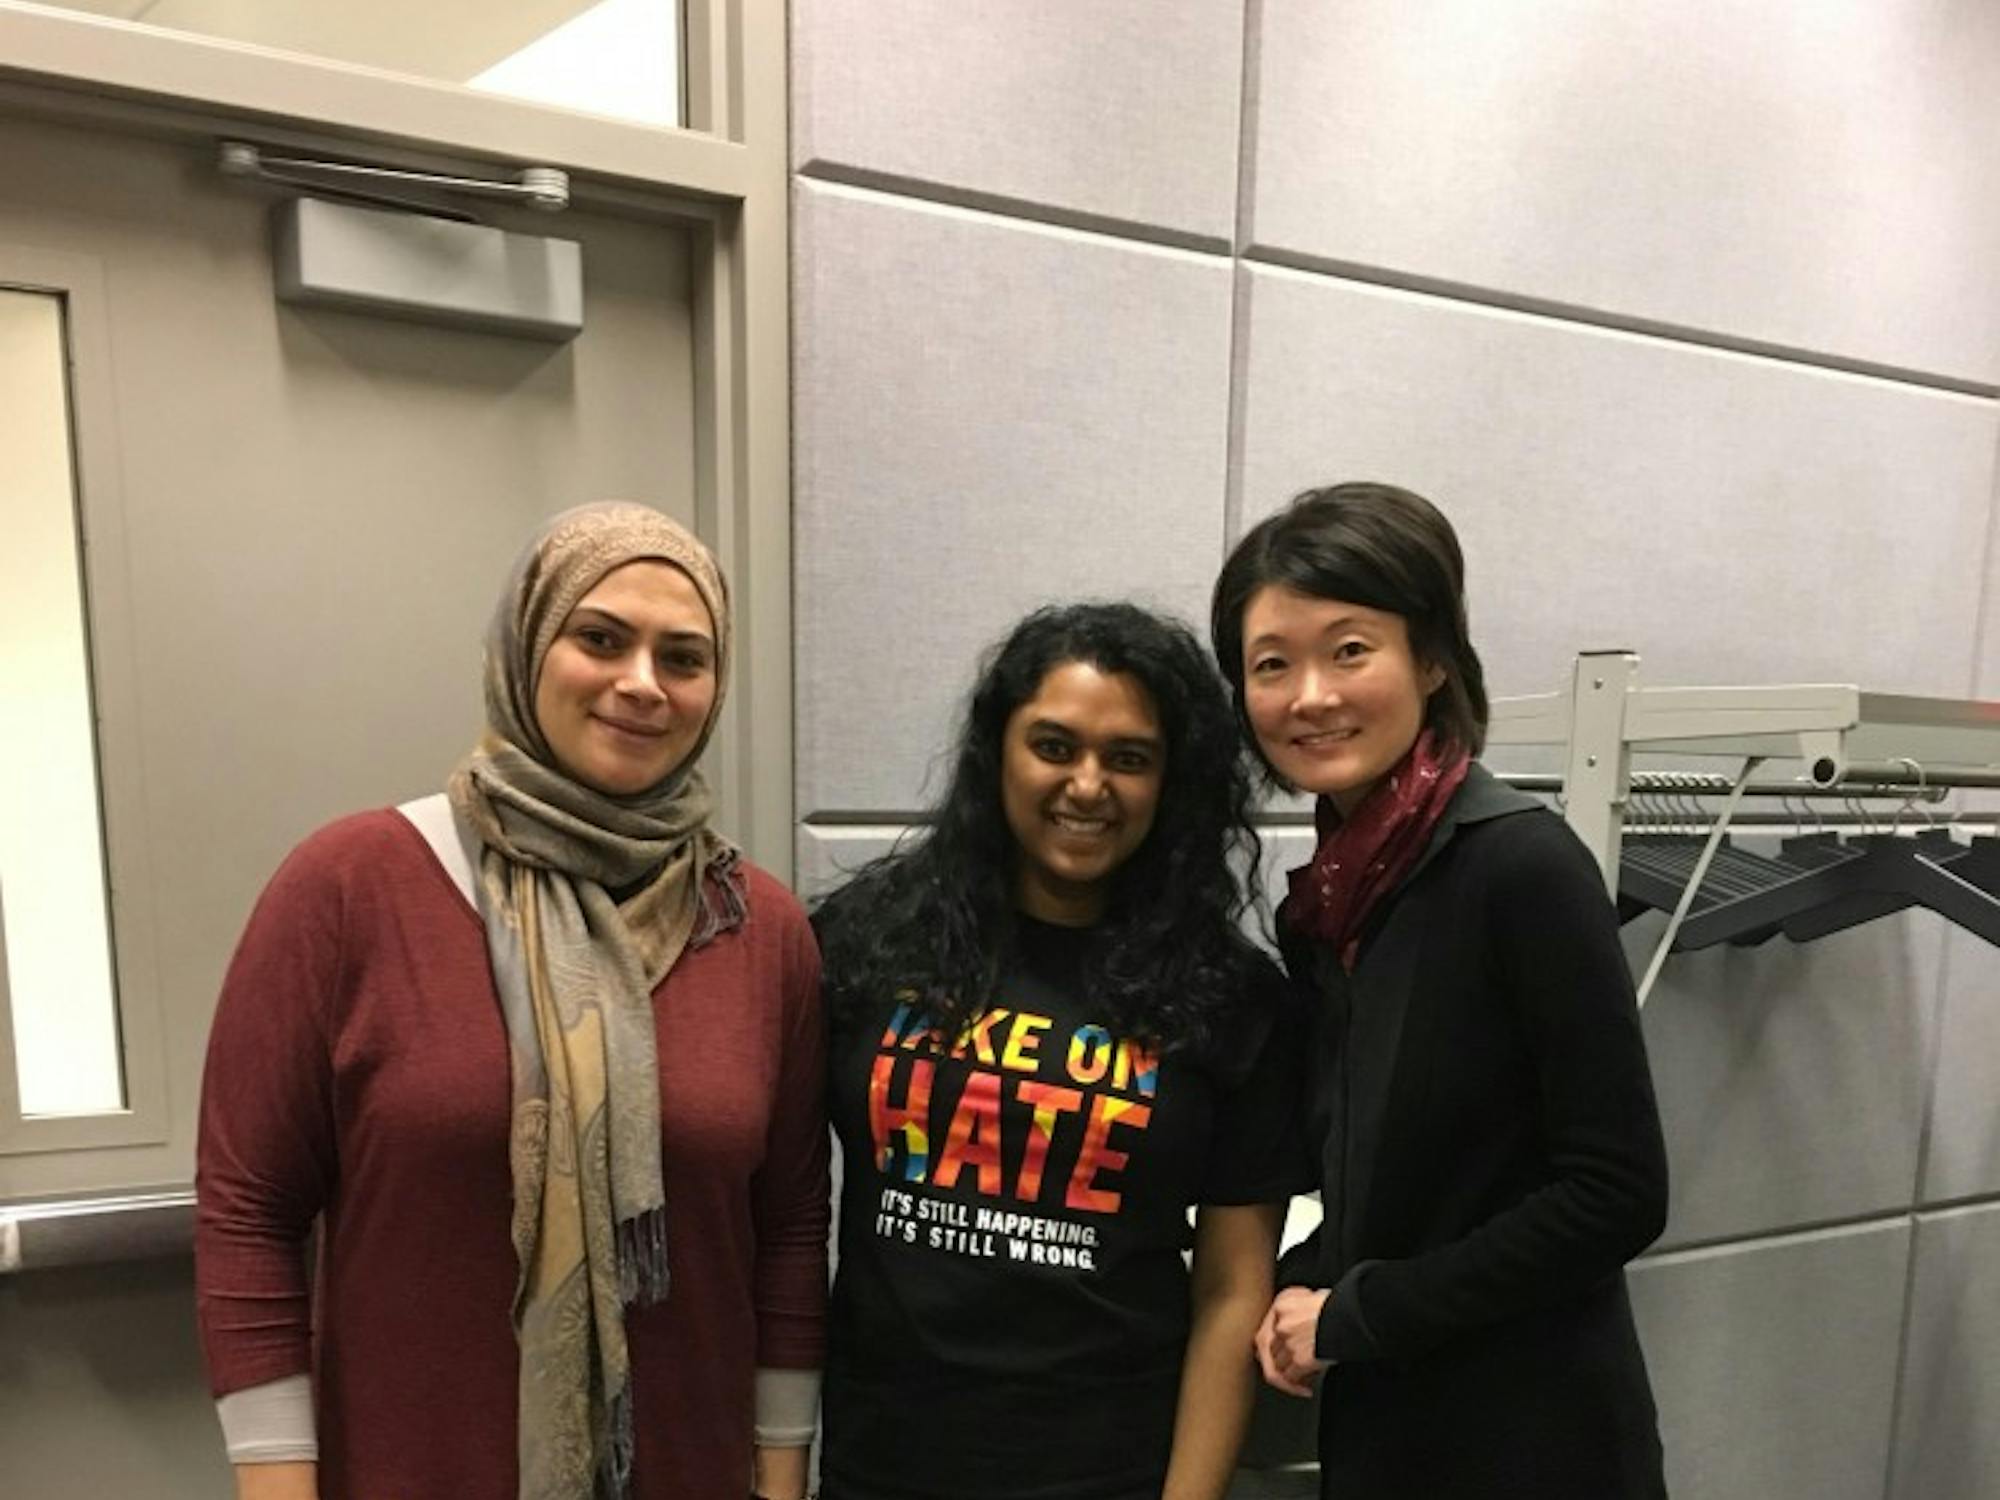 From left to right: Machhadie Assi, senior studying biology and criminal justice, Fiana Arbab, senior double majoring in psychology and women's gender studies and sociology minor, and Eun-Jung Katherine Kim, Ph. D., assistant professor of philosophy at Wayne State University.